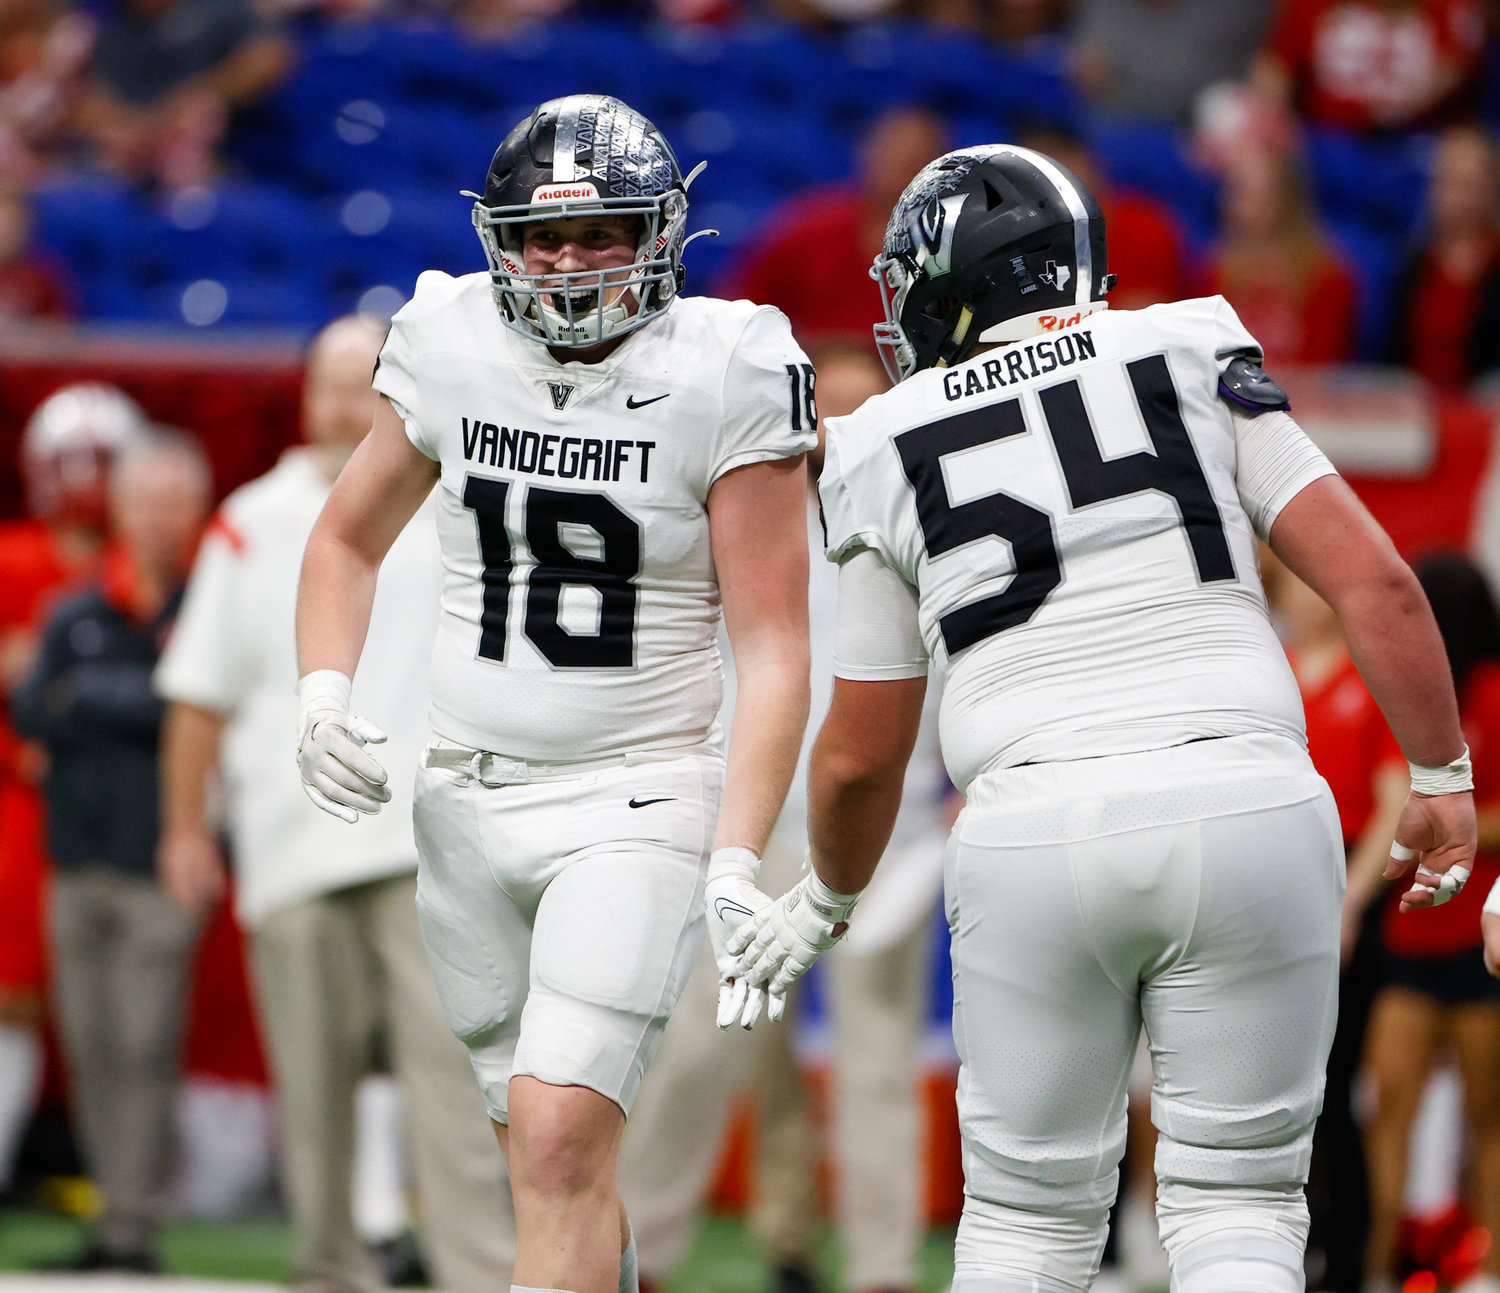 Vandegrift Vipers junior offensive lineman Gage Garrison (54) congratulates senior tight end Charlie Oliver (18) after a touchdown during the Class 6A-DII state semifinal football game between Katy and Vandegrift on Dec. 10, 2022 in San Antonio.